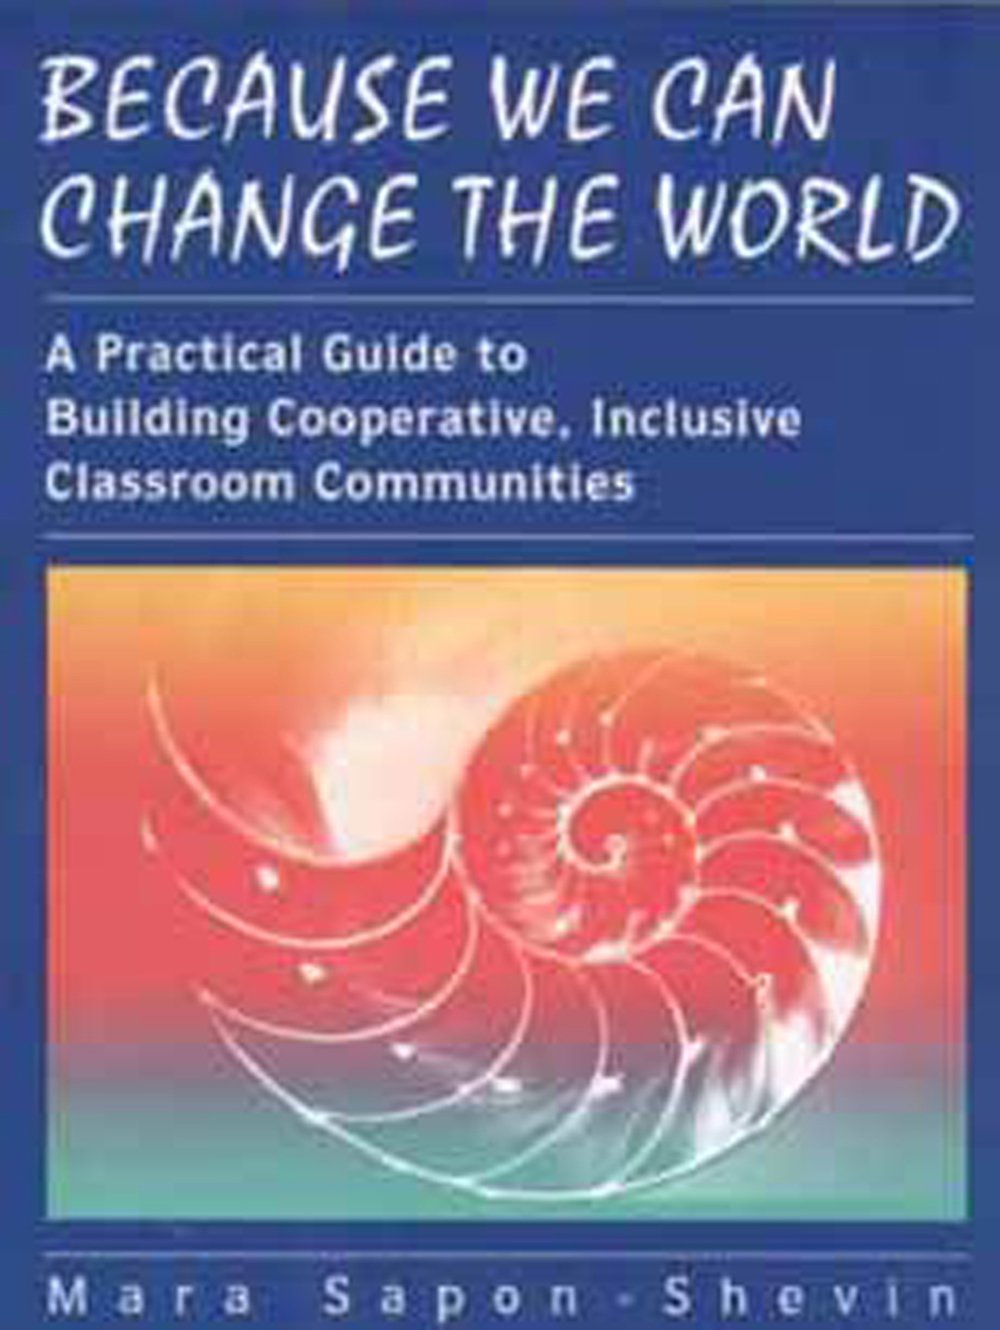 Because We Can Change the World: A Practical Guide to Building Cooperative, Inclusive Classroom Communities